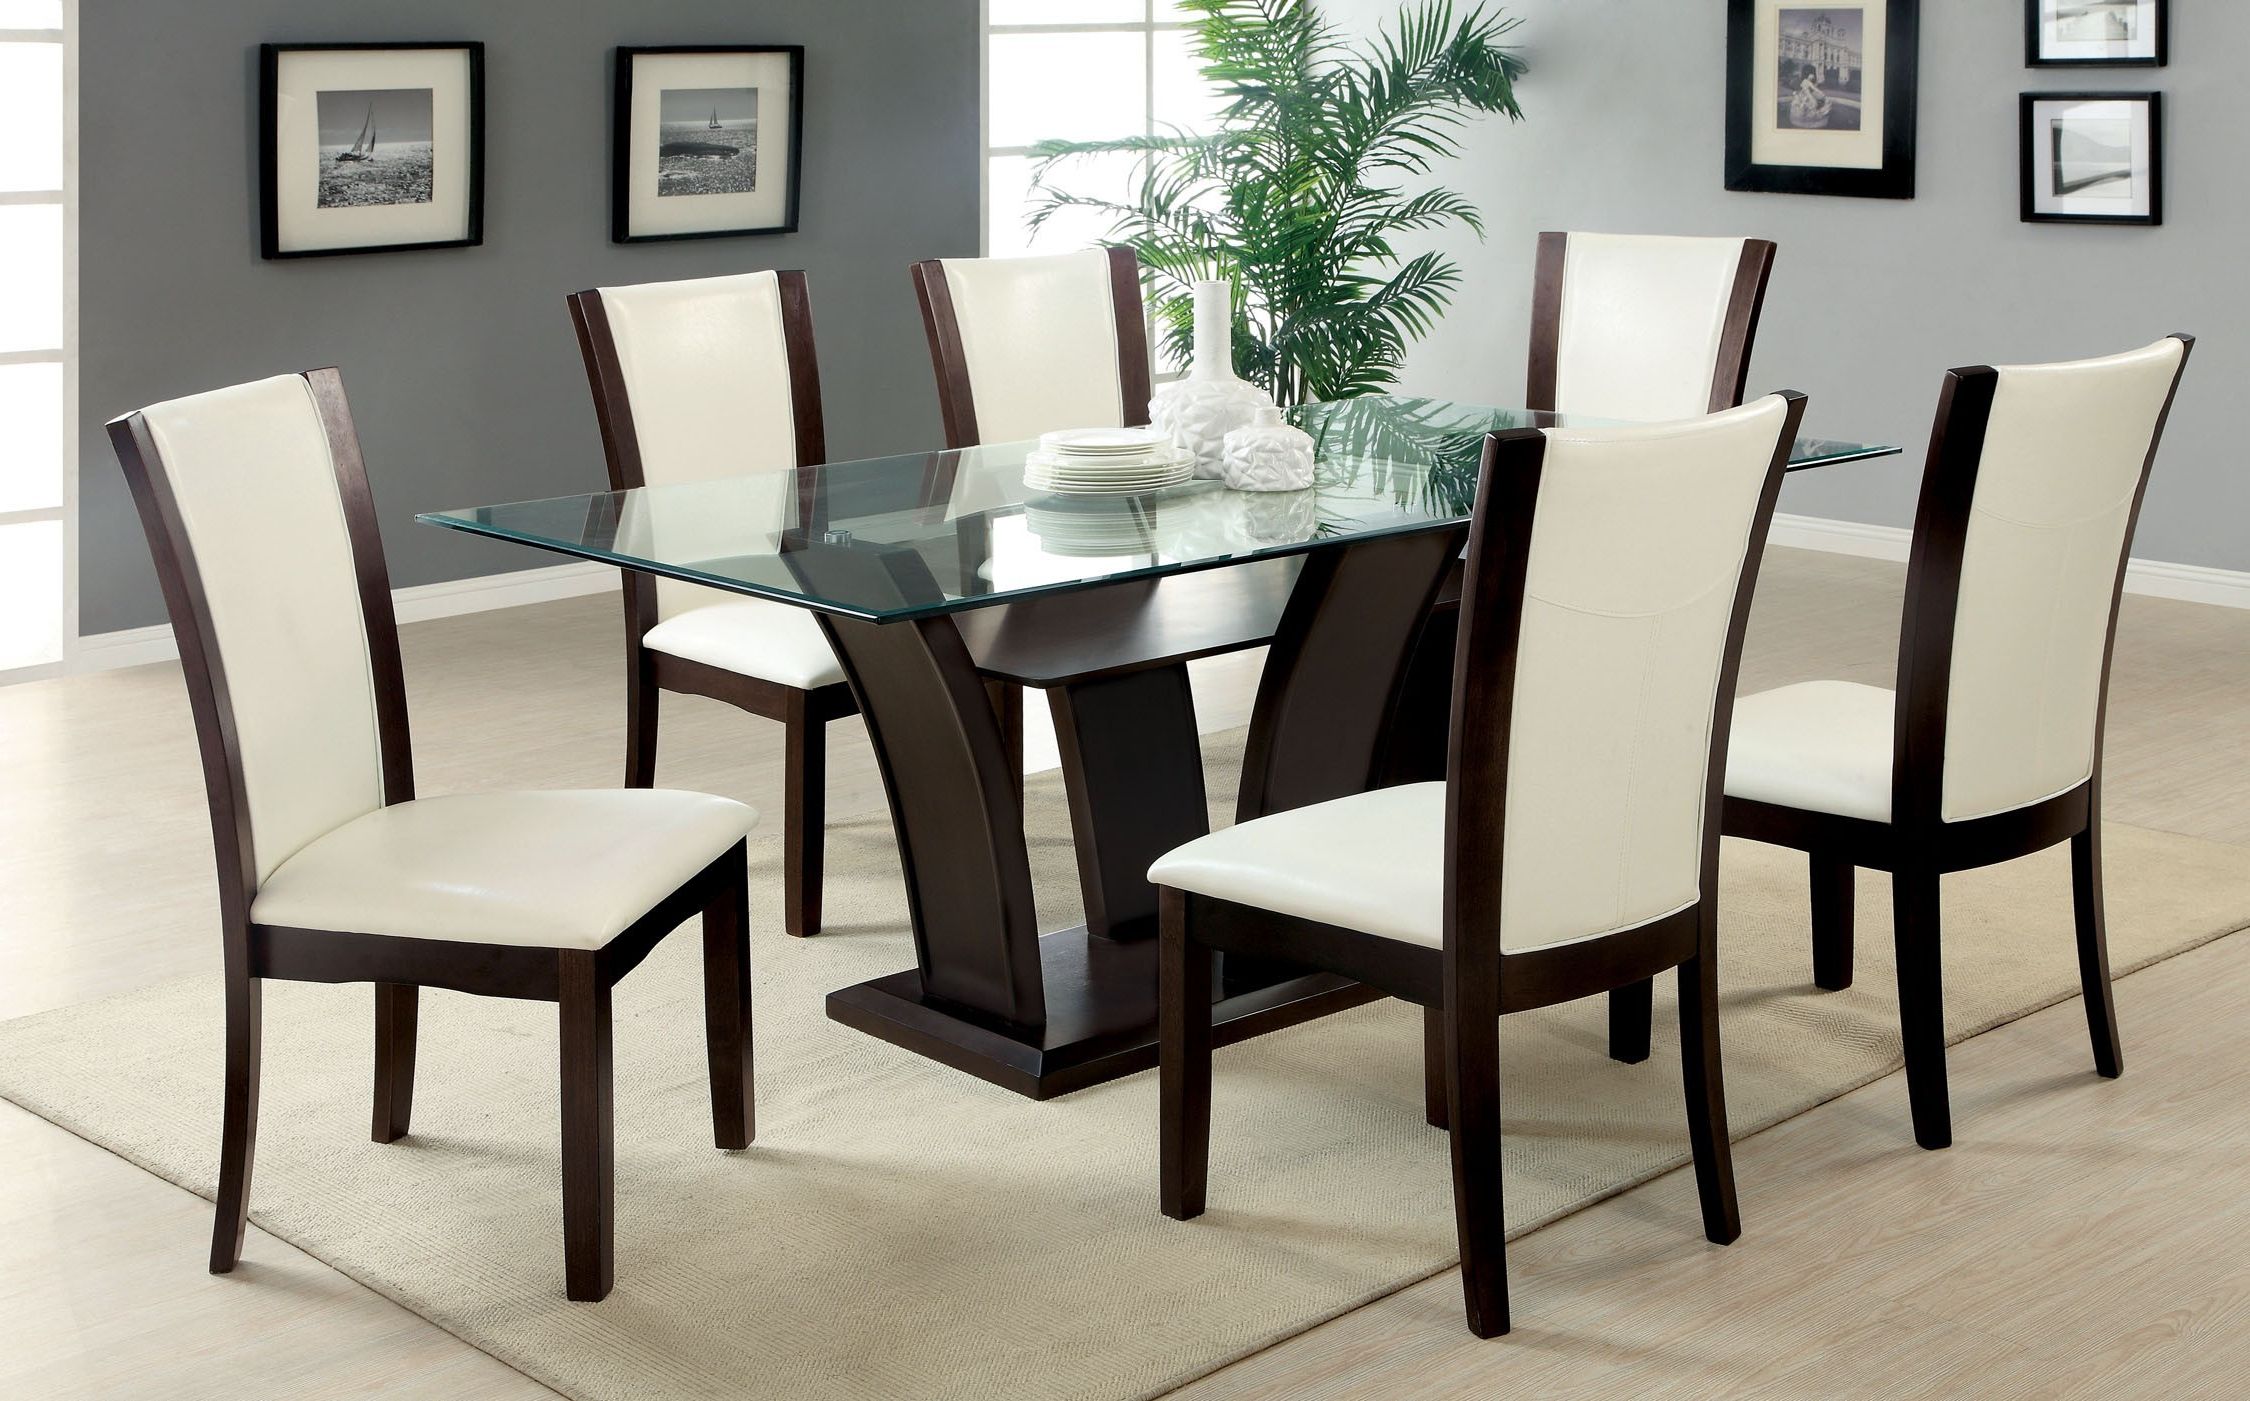 Widely Used Stylish 6 Seat Dining Room Table – Father Of Trust Designs Pertaining To Contemporary 6 Seating Rectangular Dining Tables (View 7 of 25)